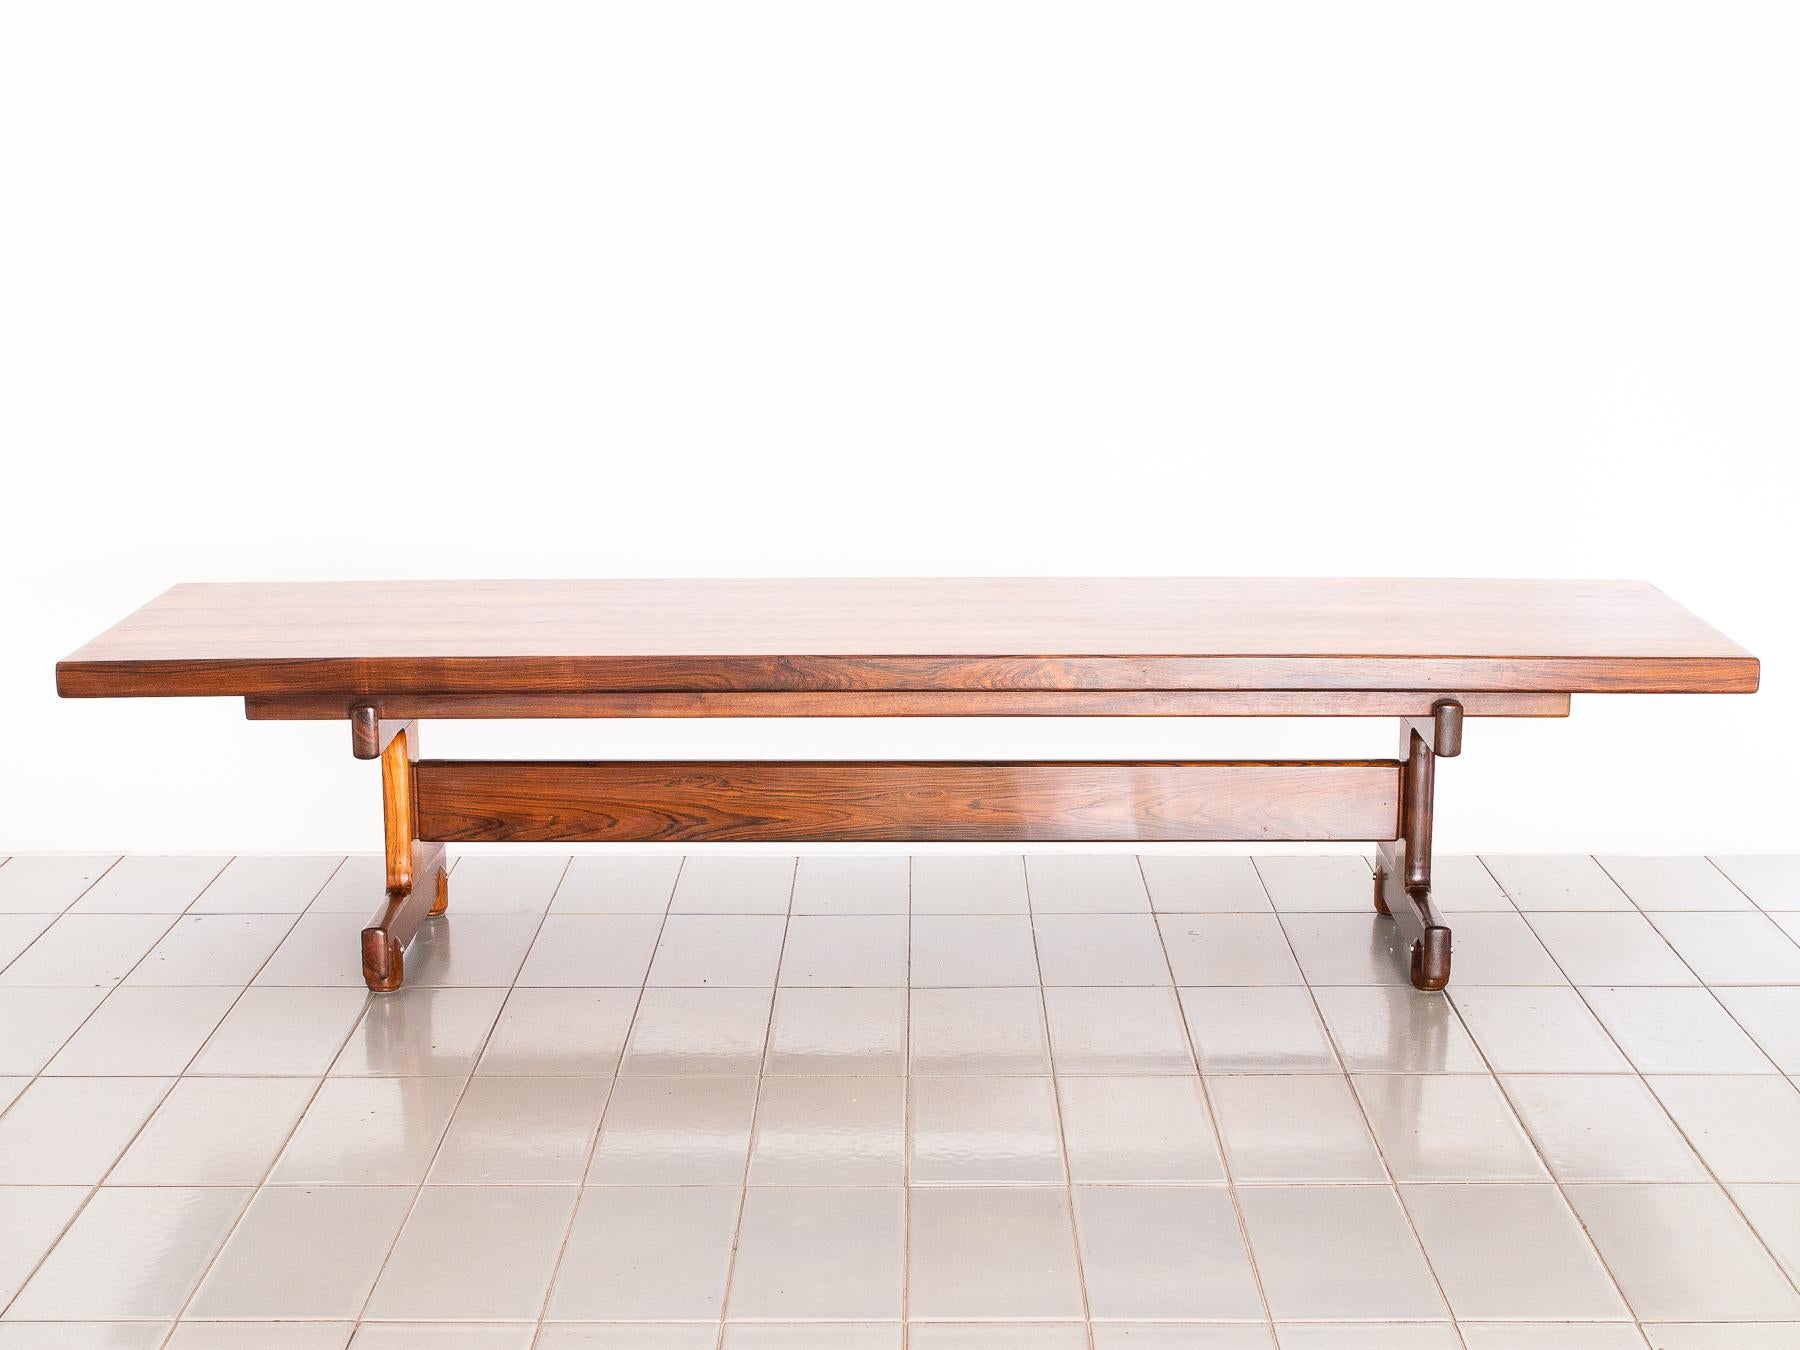 The Cinthia bench is mostly used as beautiful long coffee table. Piece is still in it's acquired condition, with no losses or gouges to the top. Can be restored as the client wants.